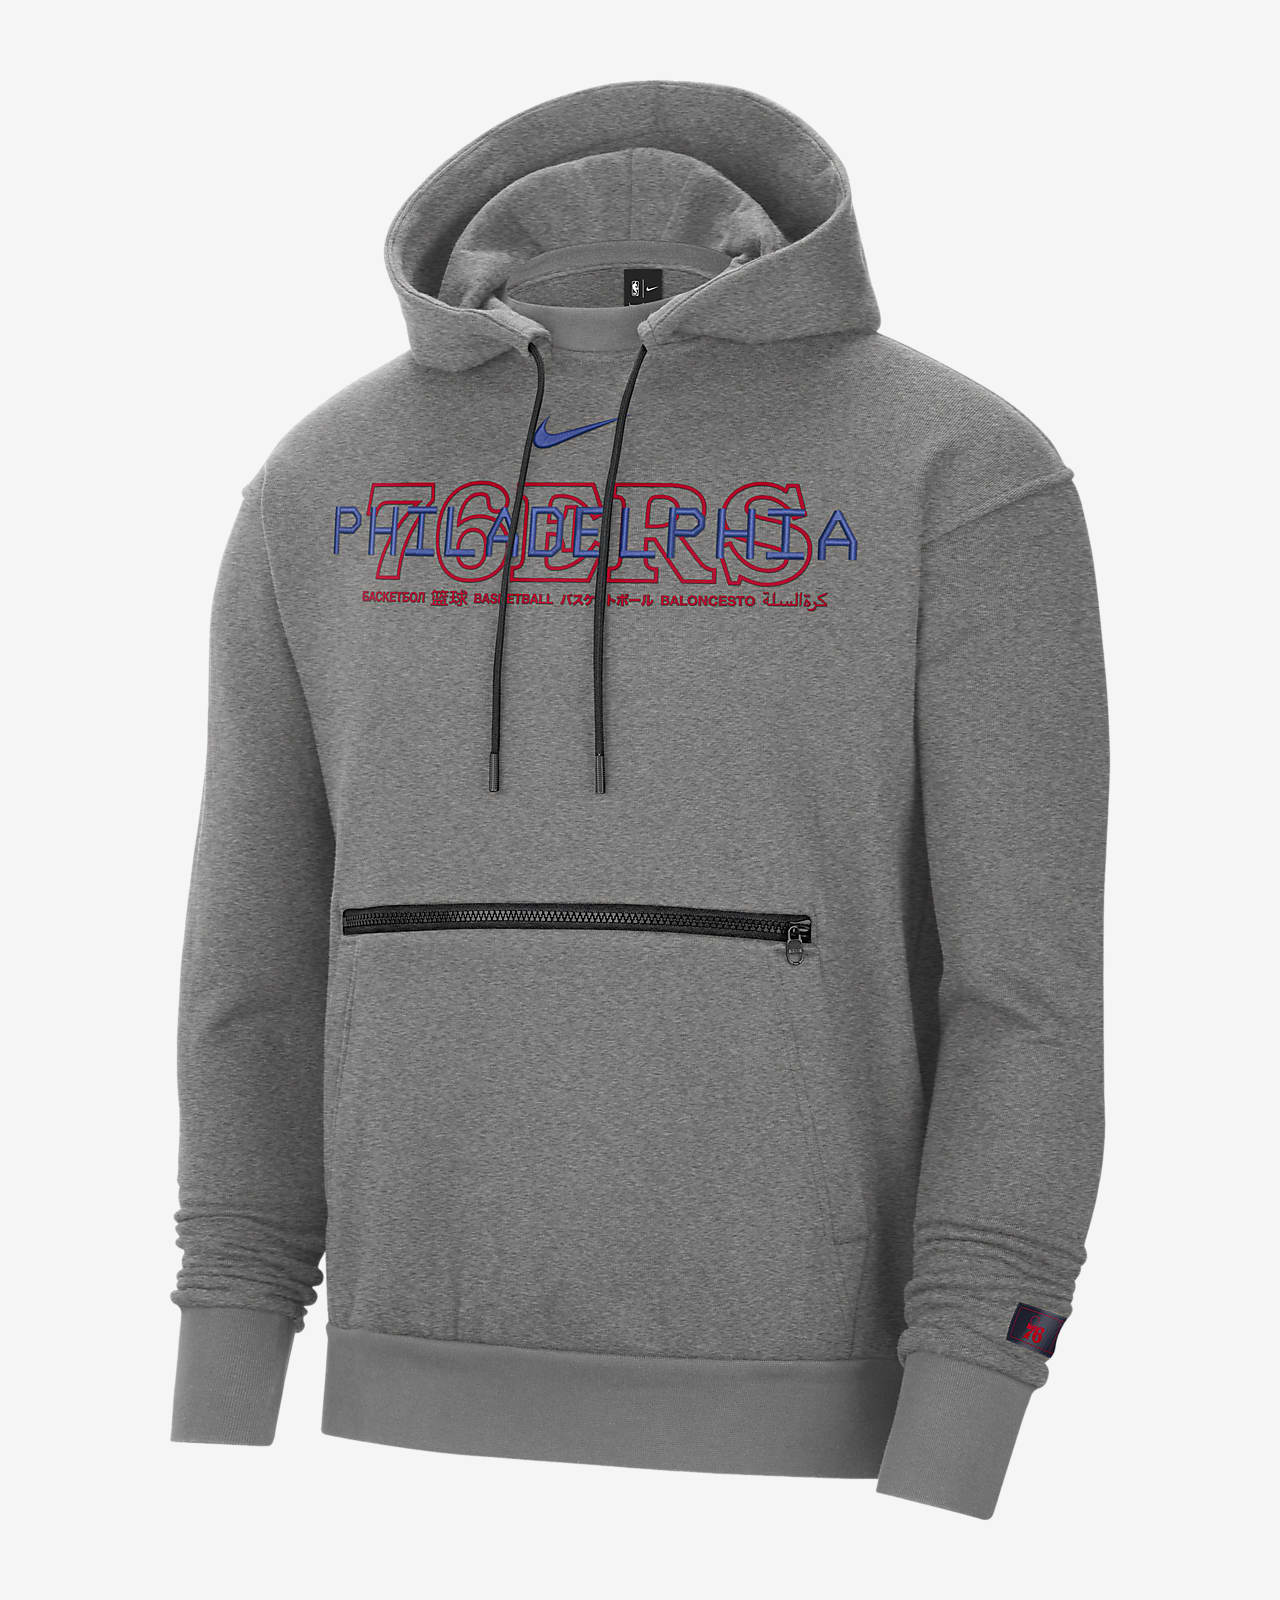 76ers Courtside Men's Nike NBA Pullover 